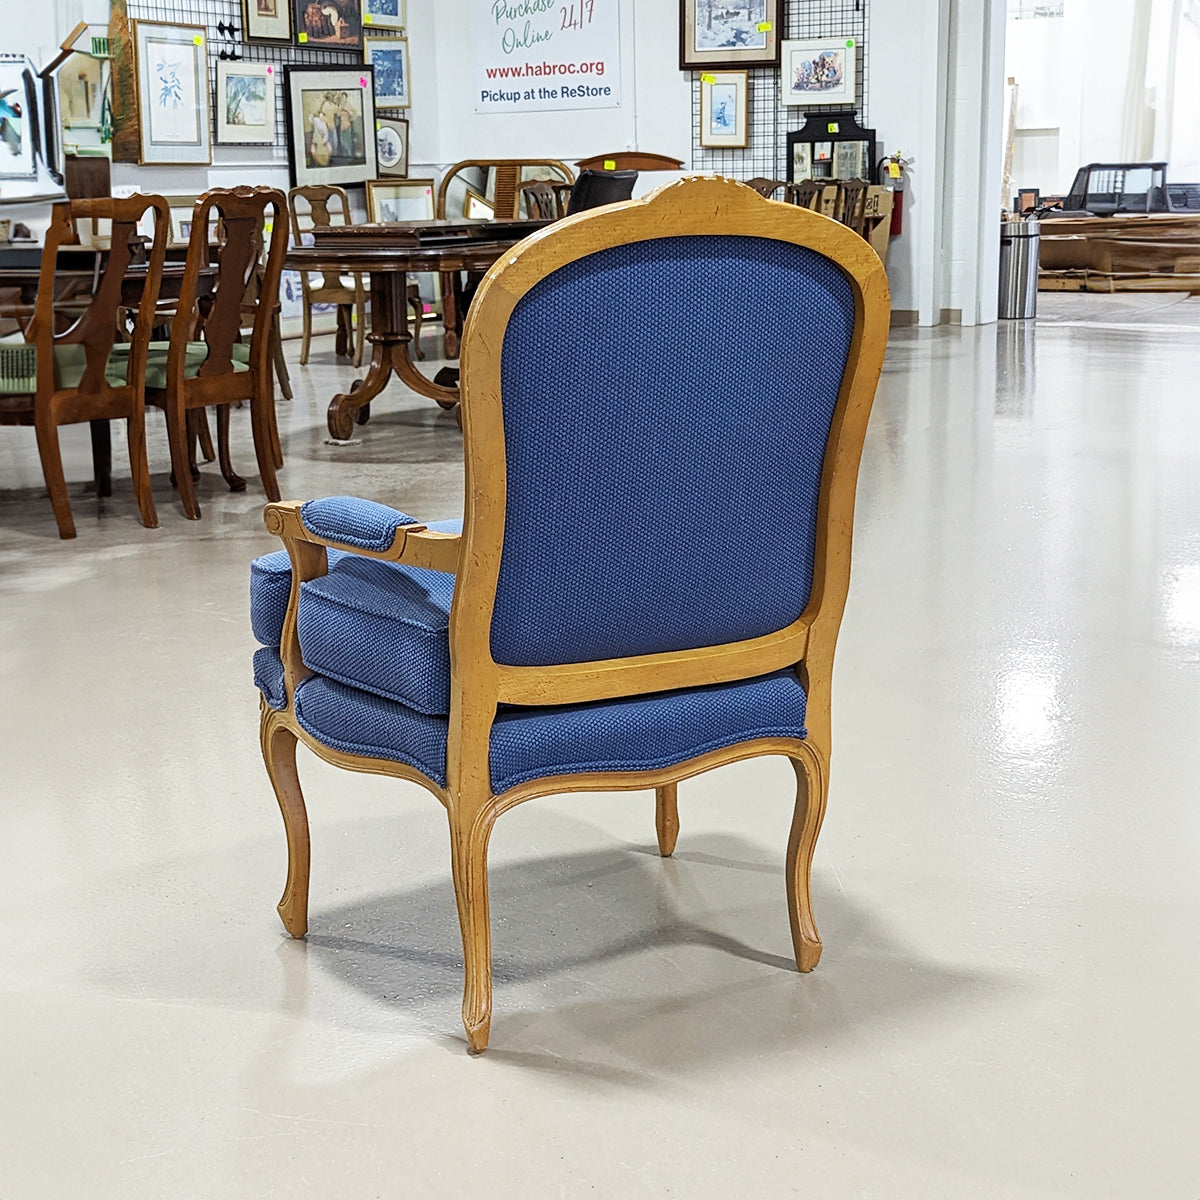 Blue French Provincial Style Armchair - Habroc - Online ReStore